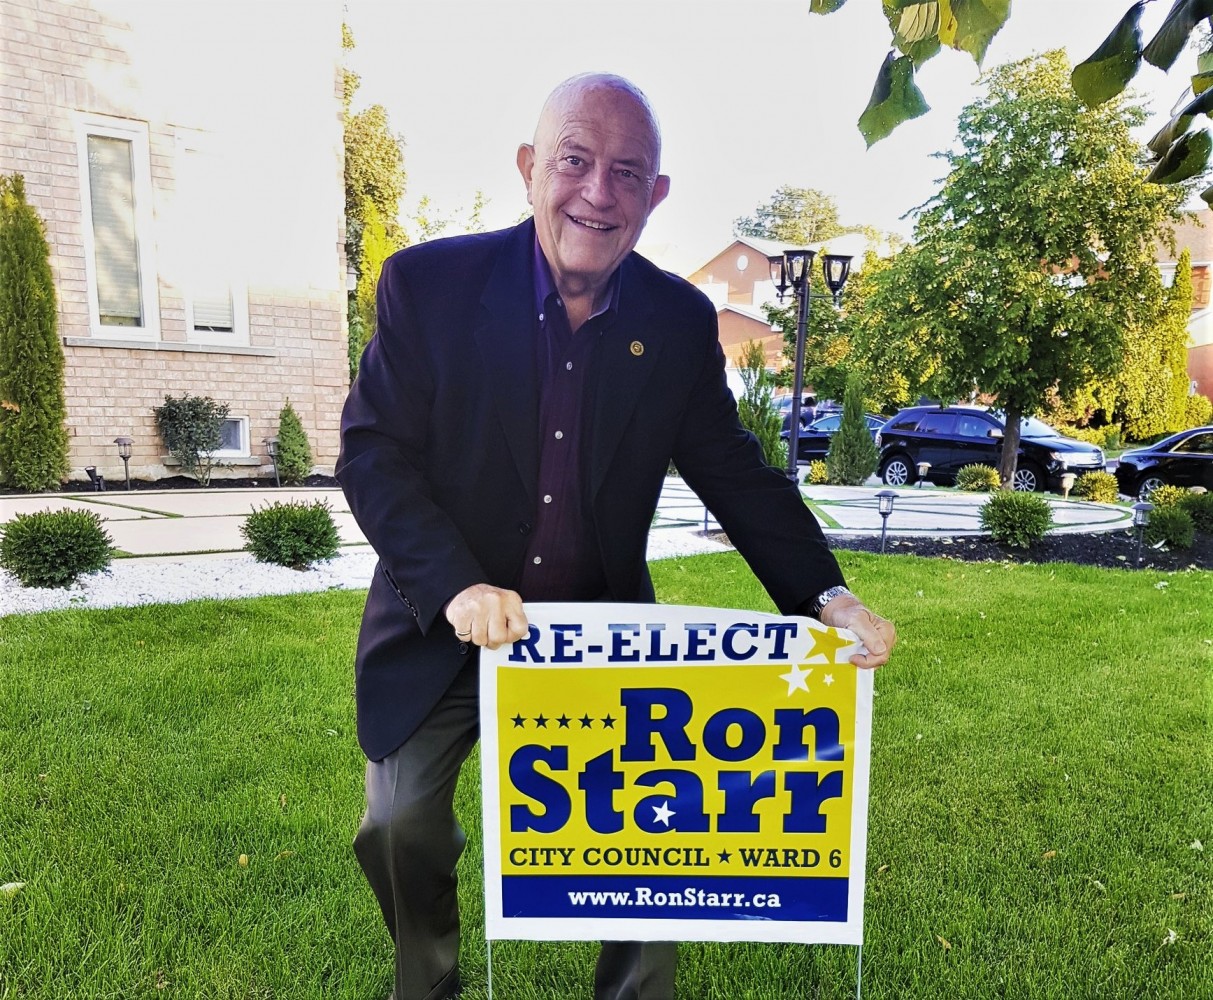 Mississauga Councillor Ron Starr registers for reelection after court challenge to block release of investigation report on his alleged harassment of Karen Ras